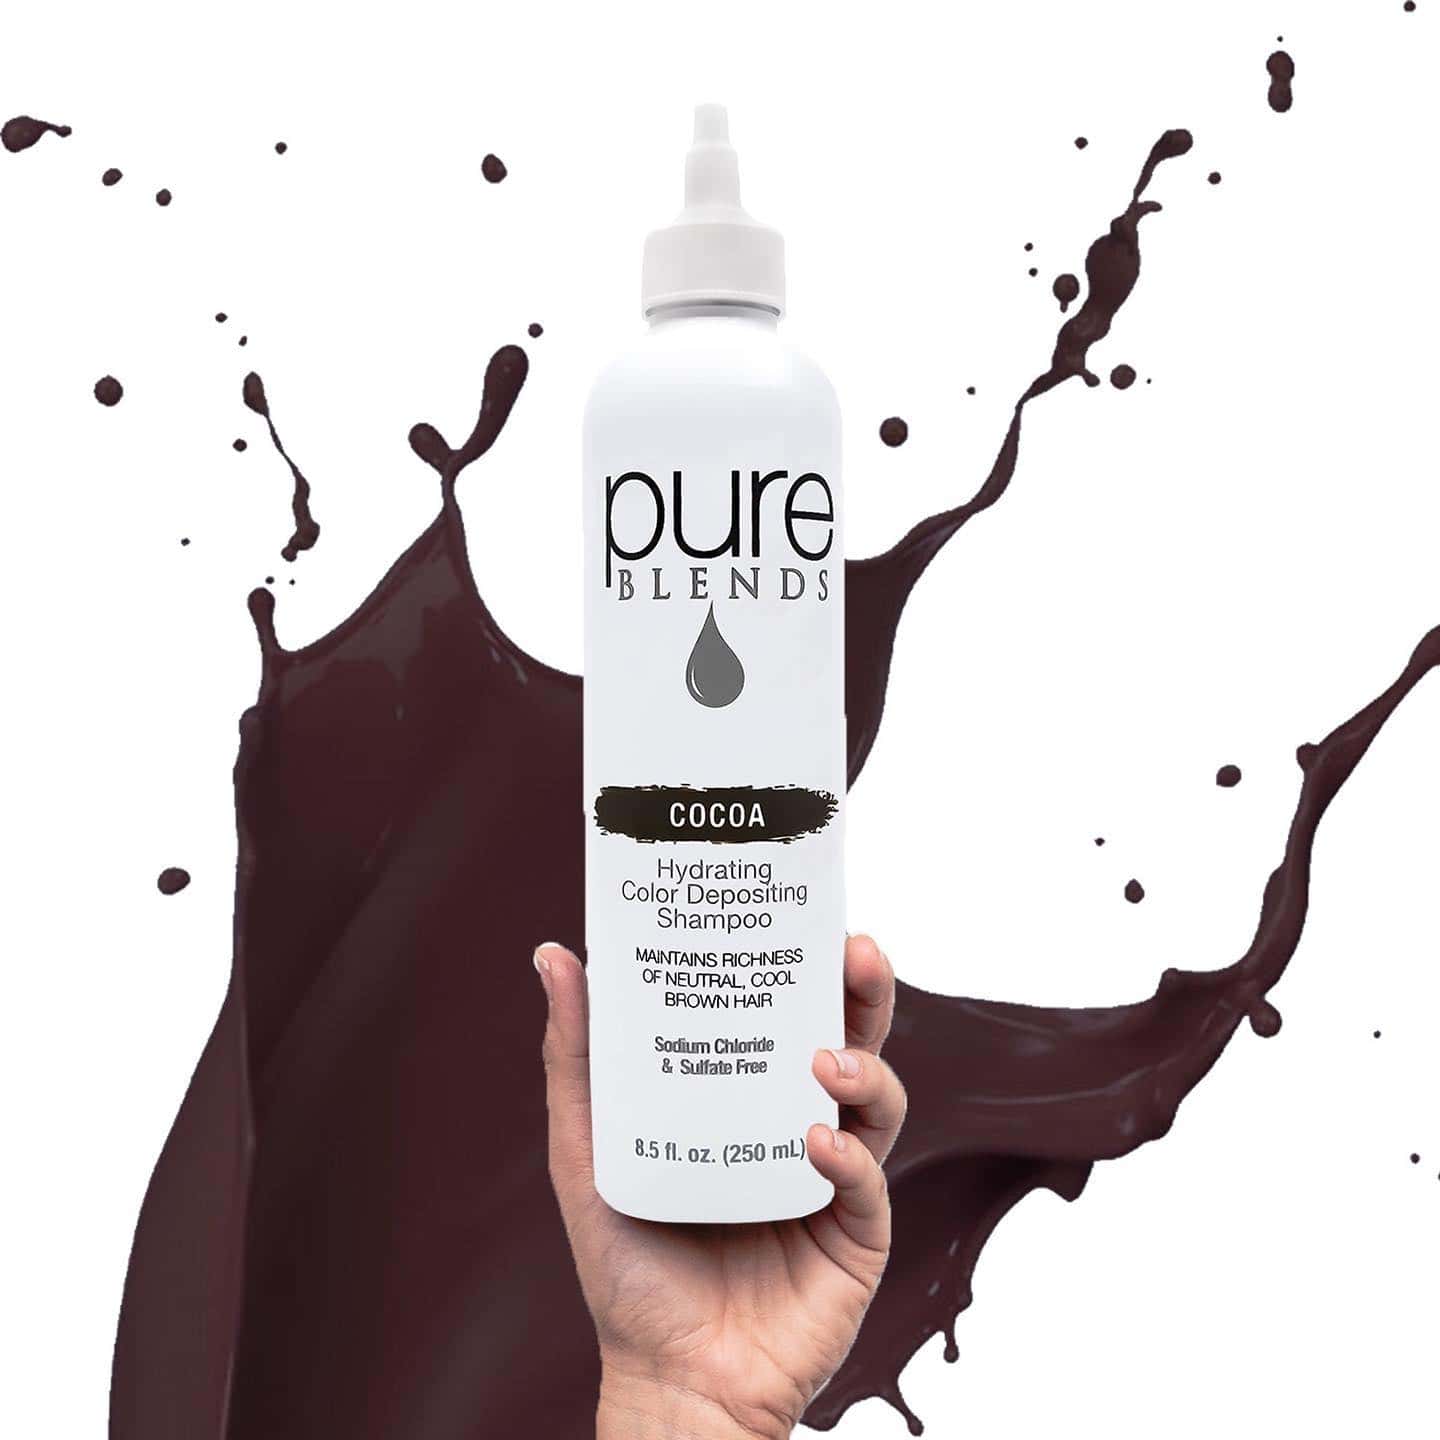 holding a bottle of pure blends cocoa color depositing shampoo